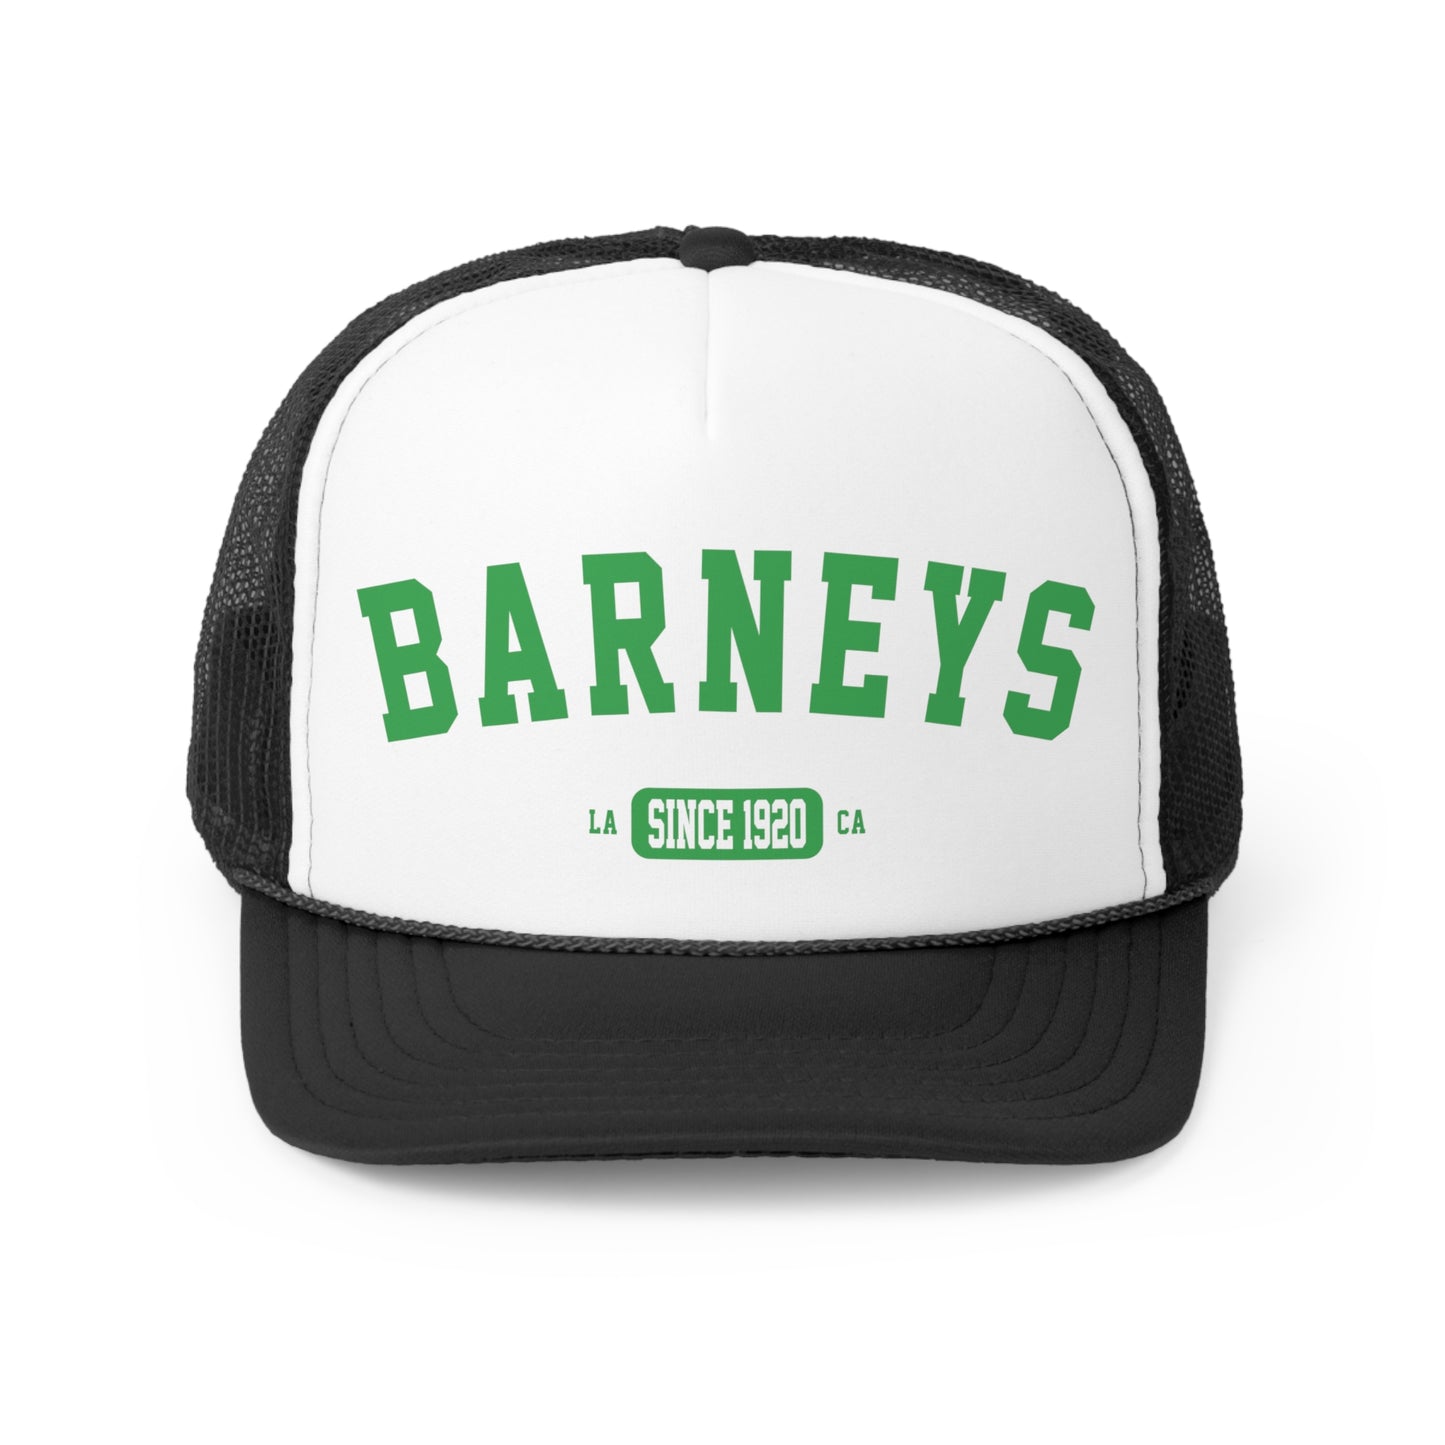 Vintage Collegiate | BARNEY'S BEANERY - Trucker Hat | Green Graphic On Black And White Trucker Hat, Front View